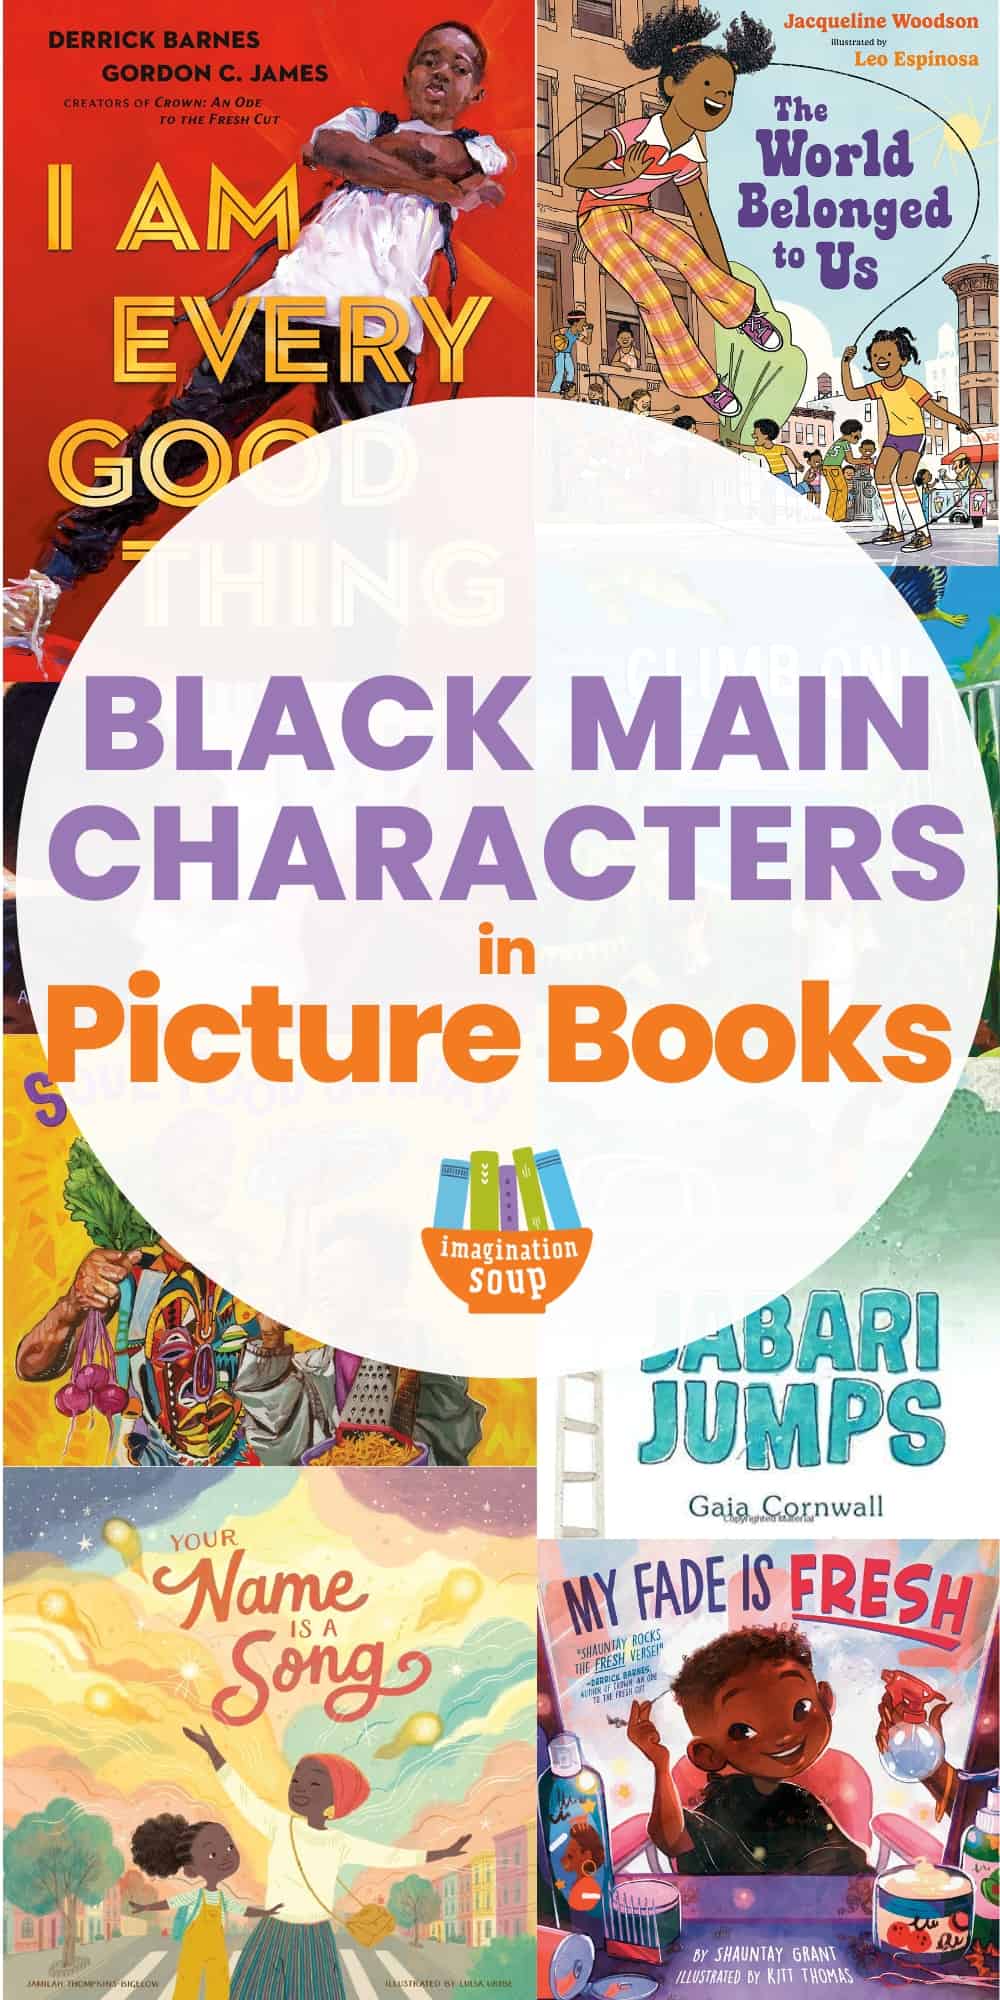 Celebrate Black lives, Black boy joy, and Black girl magic with amazing picture books with Black main characters.